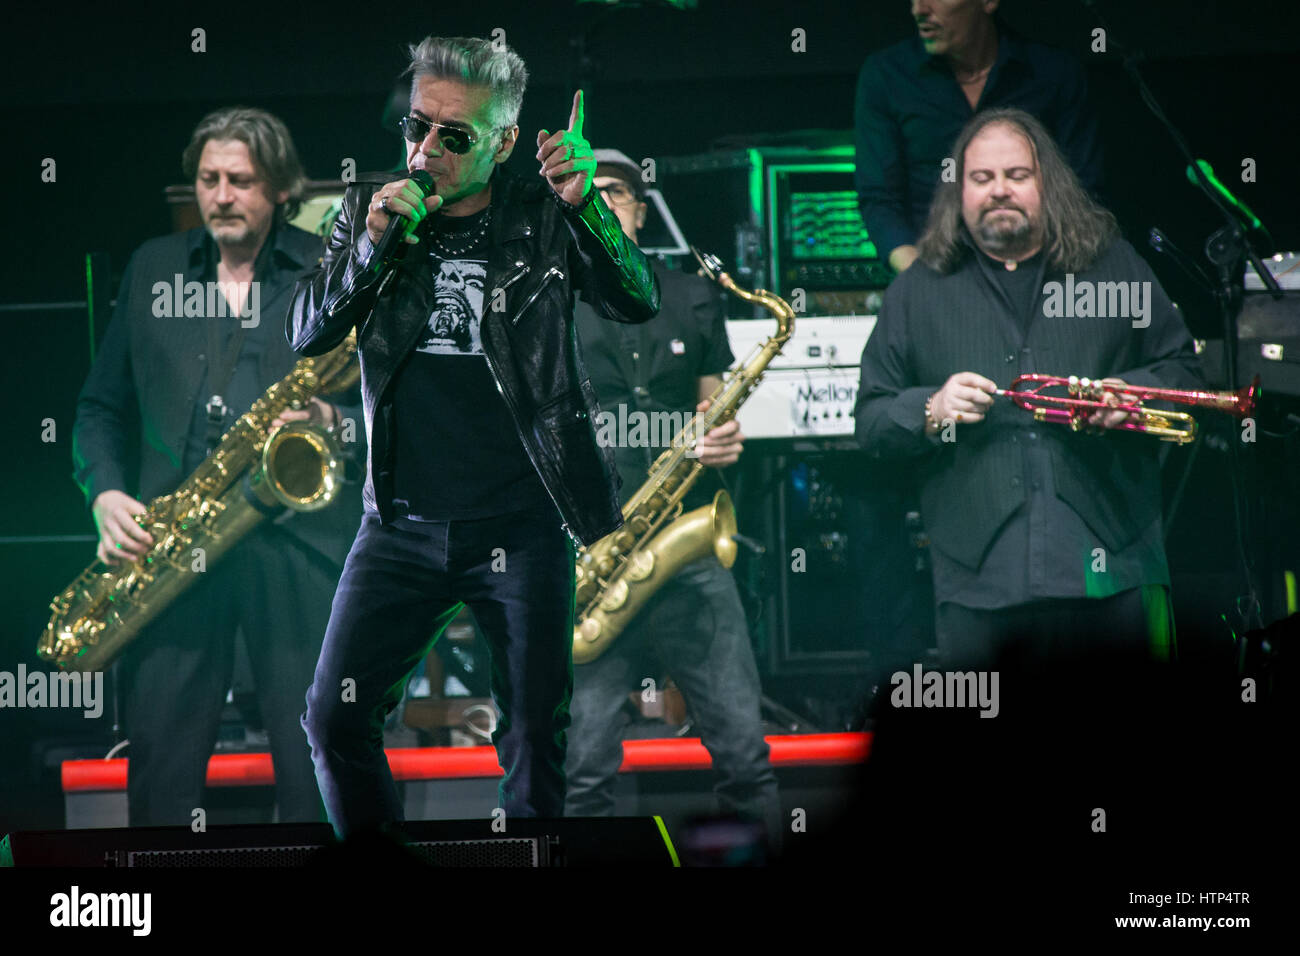 Milan Italy. 13th March 2017. The Italian singer-songwriter Luciano Ligabue commonly known as LIGABUE performs live on stage at Mediolanum Forum during the 'Made In Italy Tour - Palasport 2017' Stock Photo